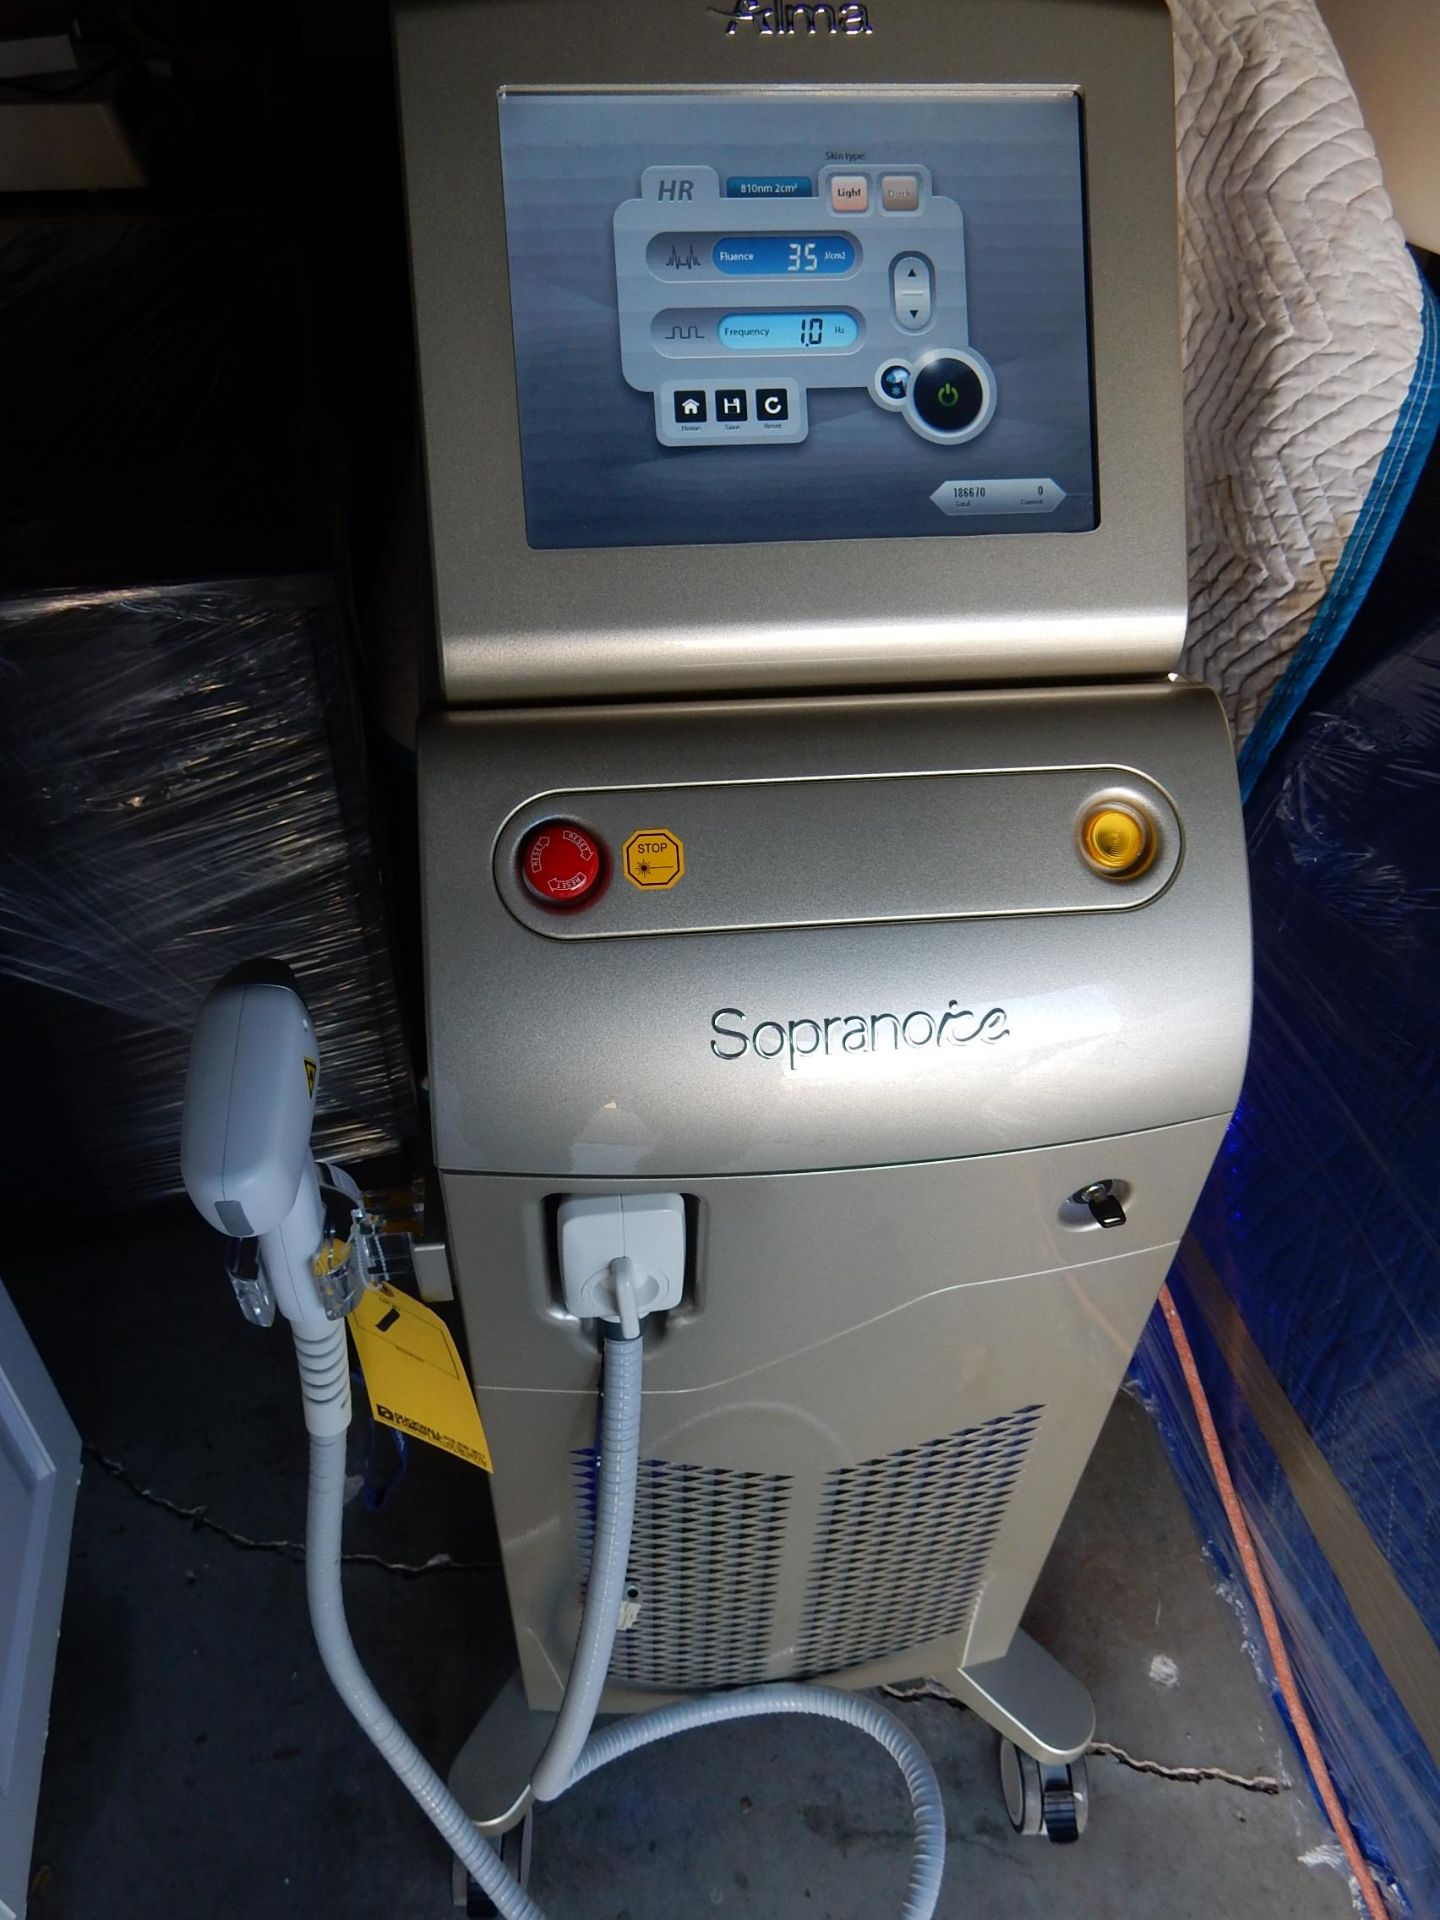 2017 ALMA SOPRANO ICE DIODE LASER HAIR REMOVAL SYSTEM, S/N S12ICE1894 - Image 3 of 14